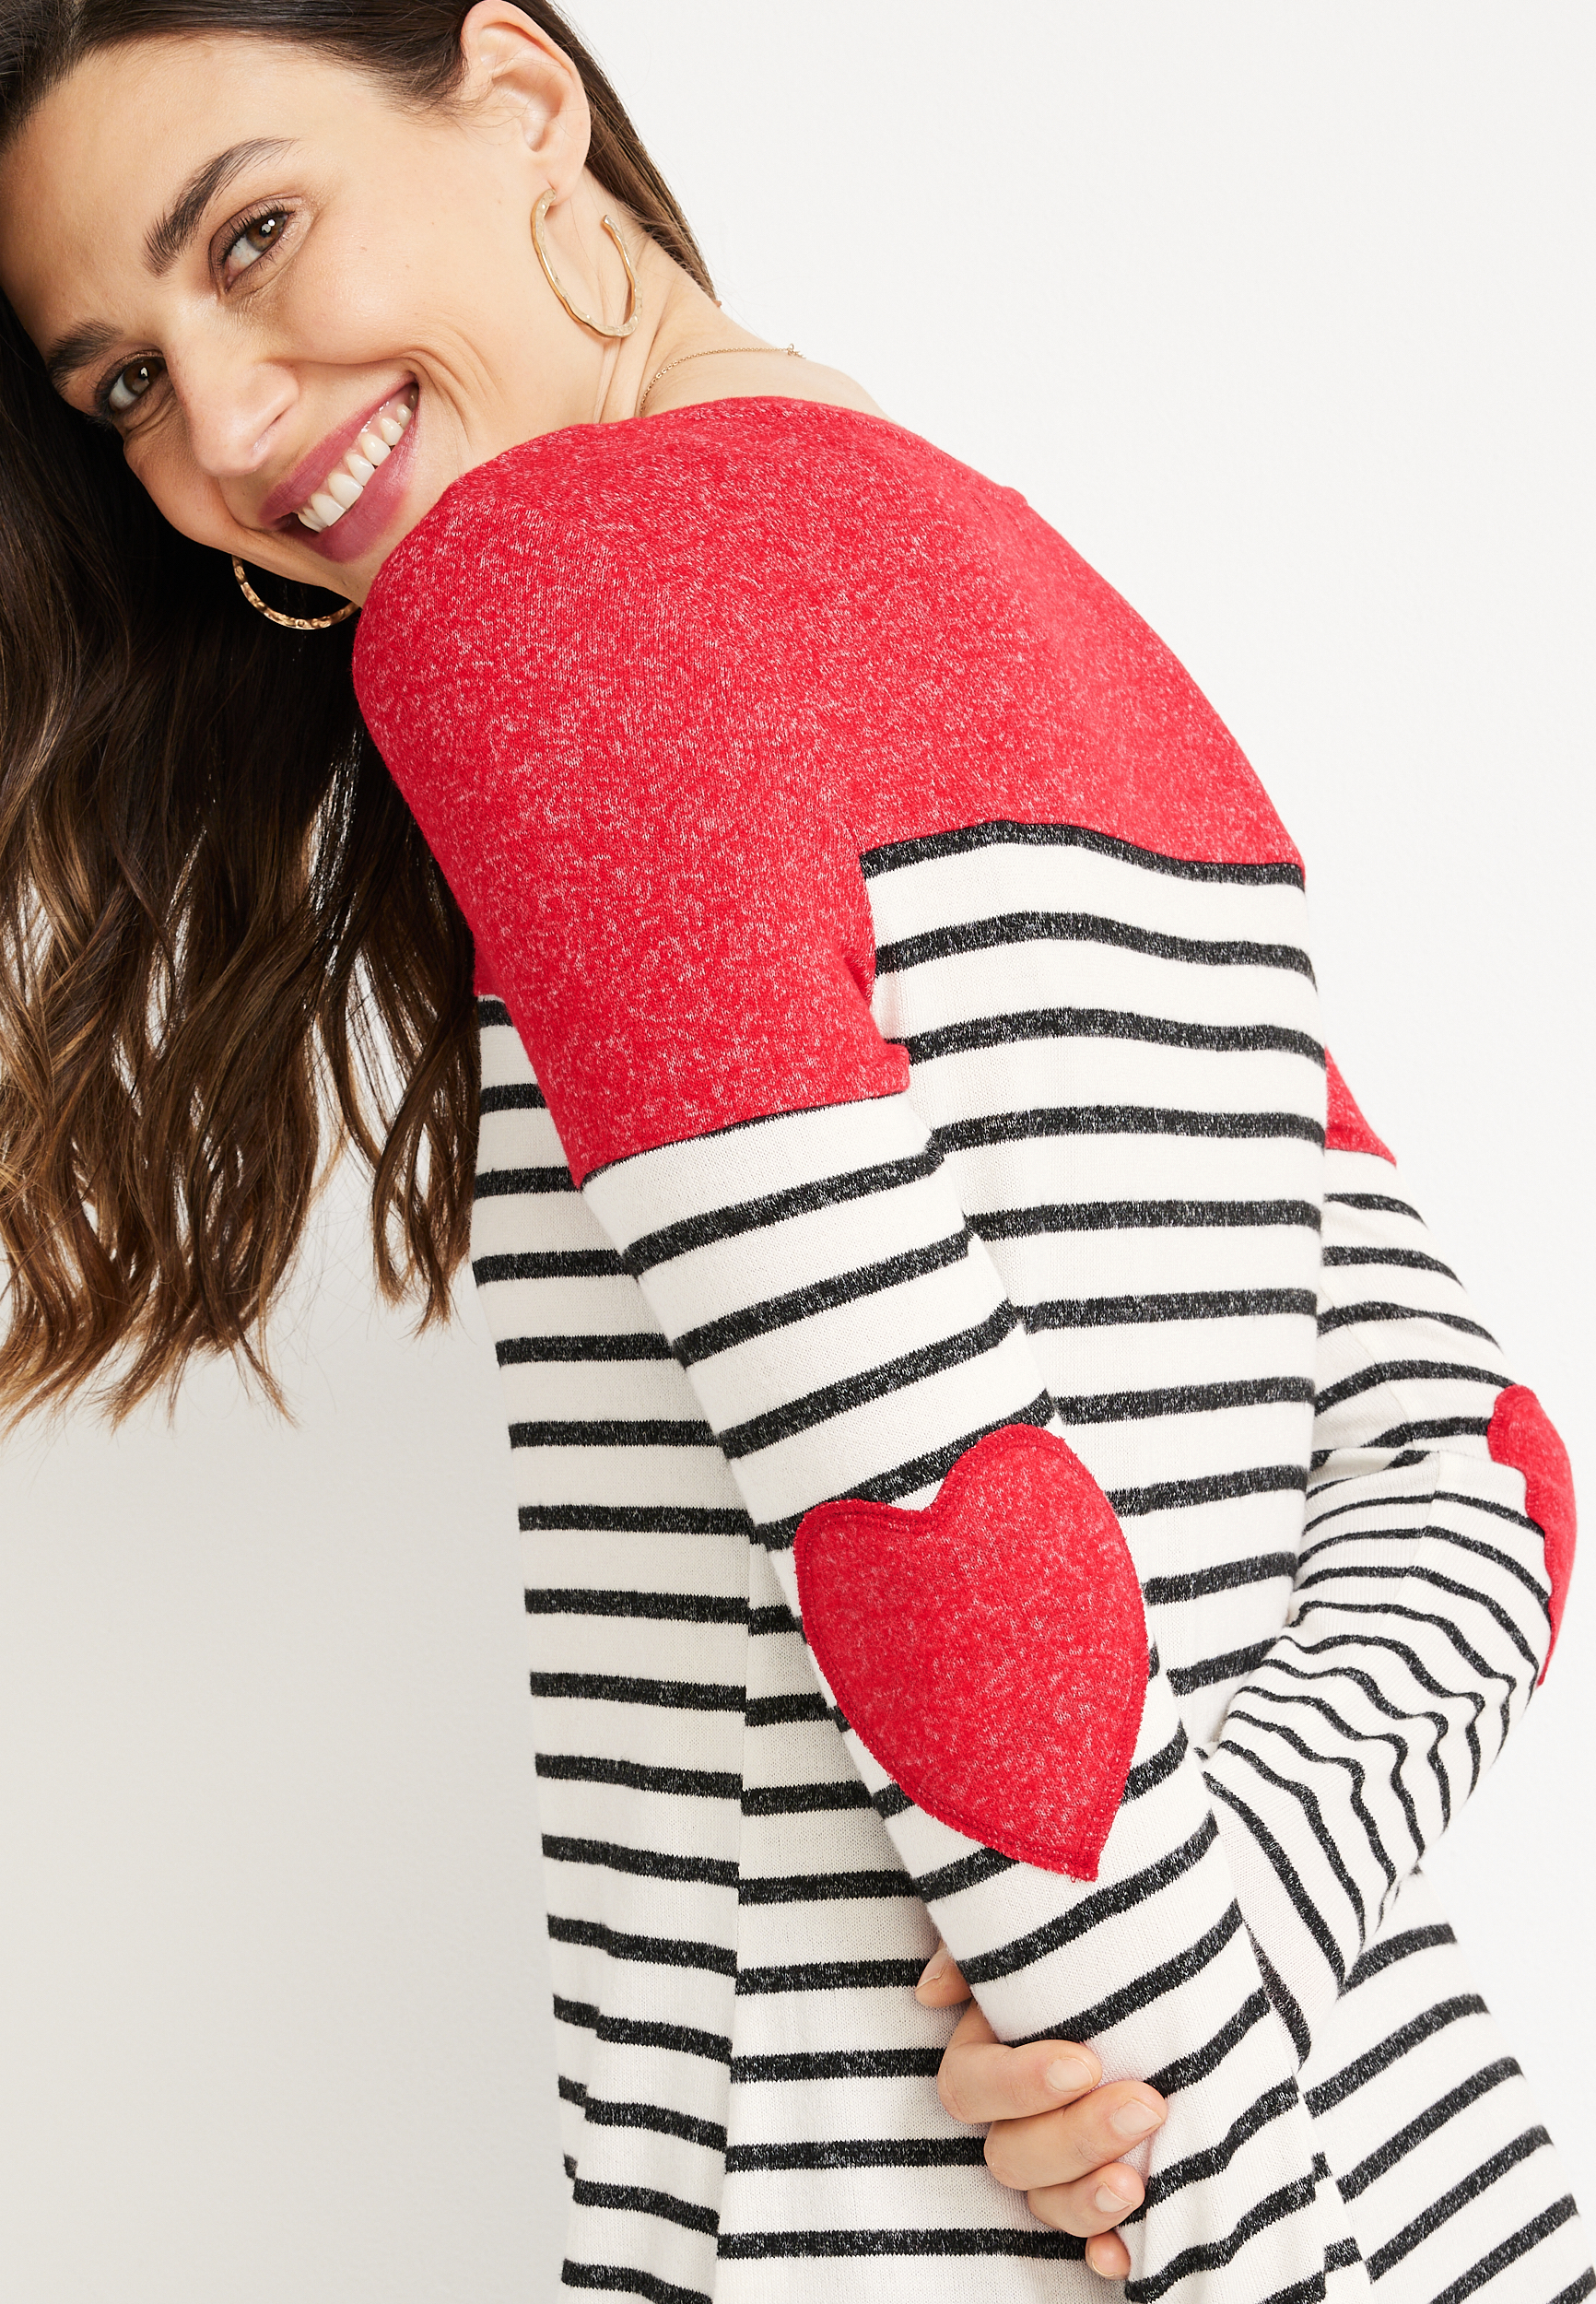 Cozy in Stripes Elbow Patch Sweater - Black & White – The Pulse